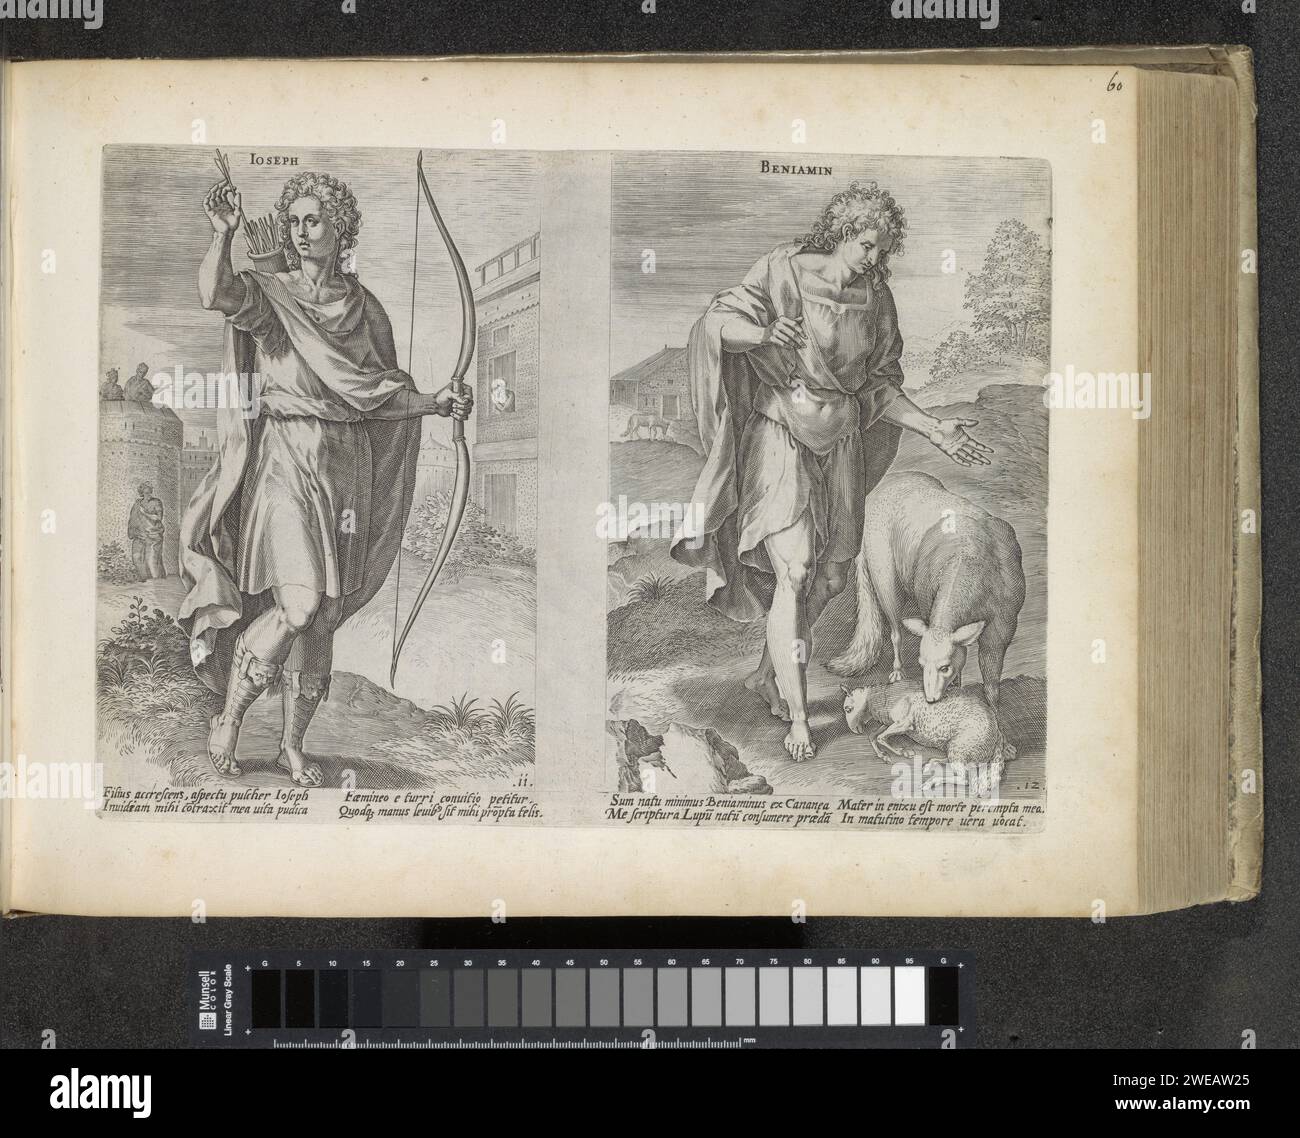 Ancestors Josef and Benjamin, 1643 print Left ancestor Jozef, the eleventh son of Jakob. Joseph has a bow and pulls an arrow out of a tube on his back. On the right ancestor Benjamin, the twelfth and last son of Jakob. In addition to Benjamin, a wolf devours a sheep, a reference to Benjamin as 'torn wolf'. Under the performances a reference in Latin to the Bible text. This print is part of an album. print maker: Antwerppublisher: Amsterdam paper engraving . Stock Photo